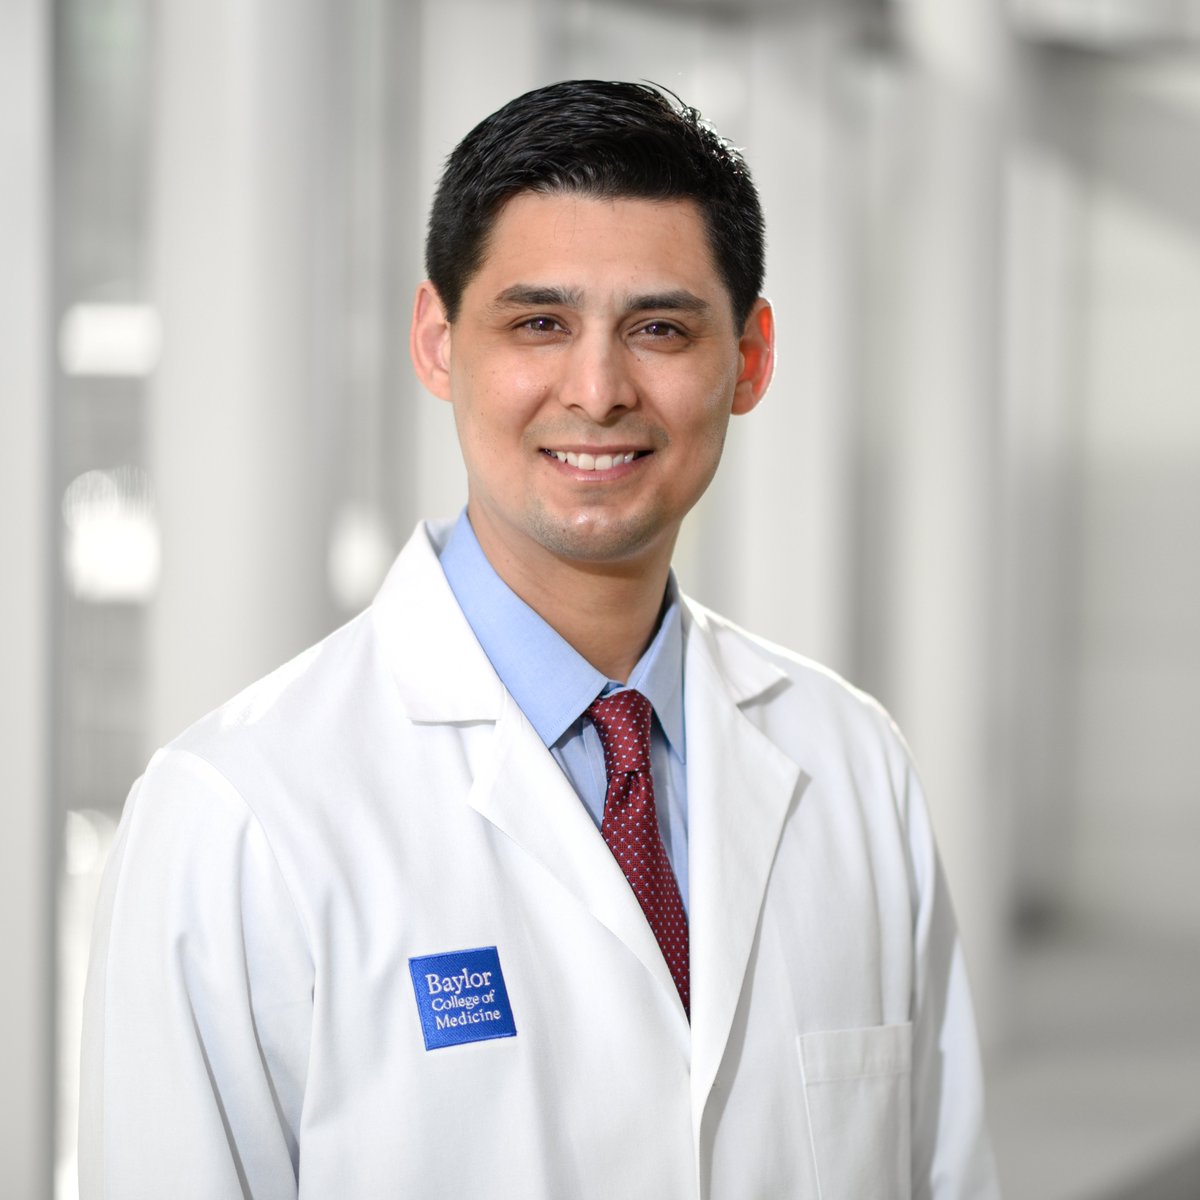 Congratulations Dr. Fernandez! Dr. Fernandez, thoracic surgeon, has received the Advancing Clinical Excellence Grant from Baylor College of Medicine and Baylor St. Luke’s Medical Center for his project “Enhancing patient mobilization in the postoperative period.”